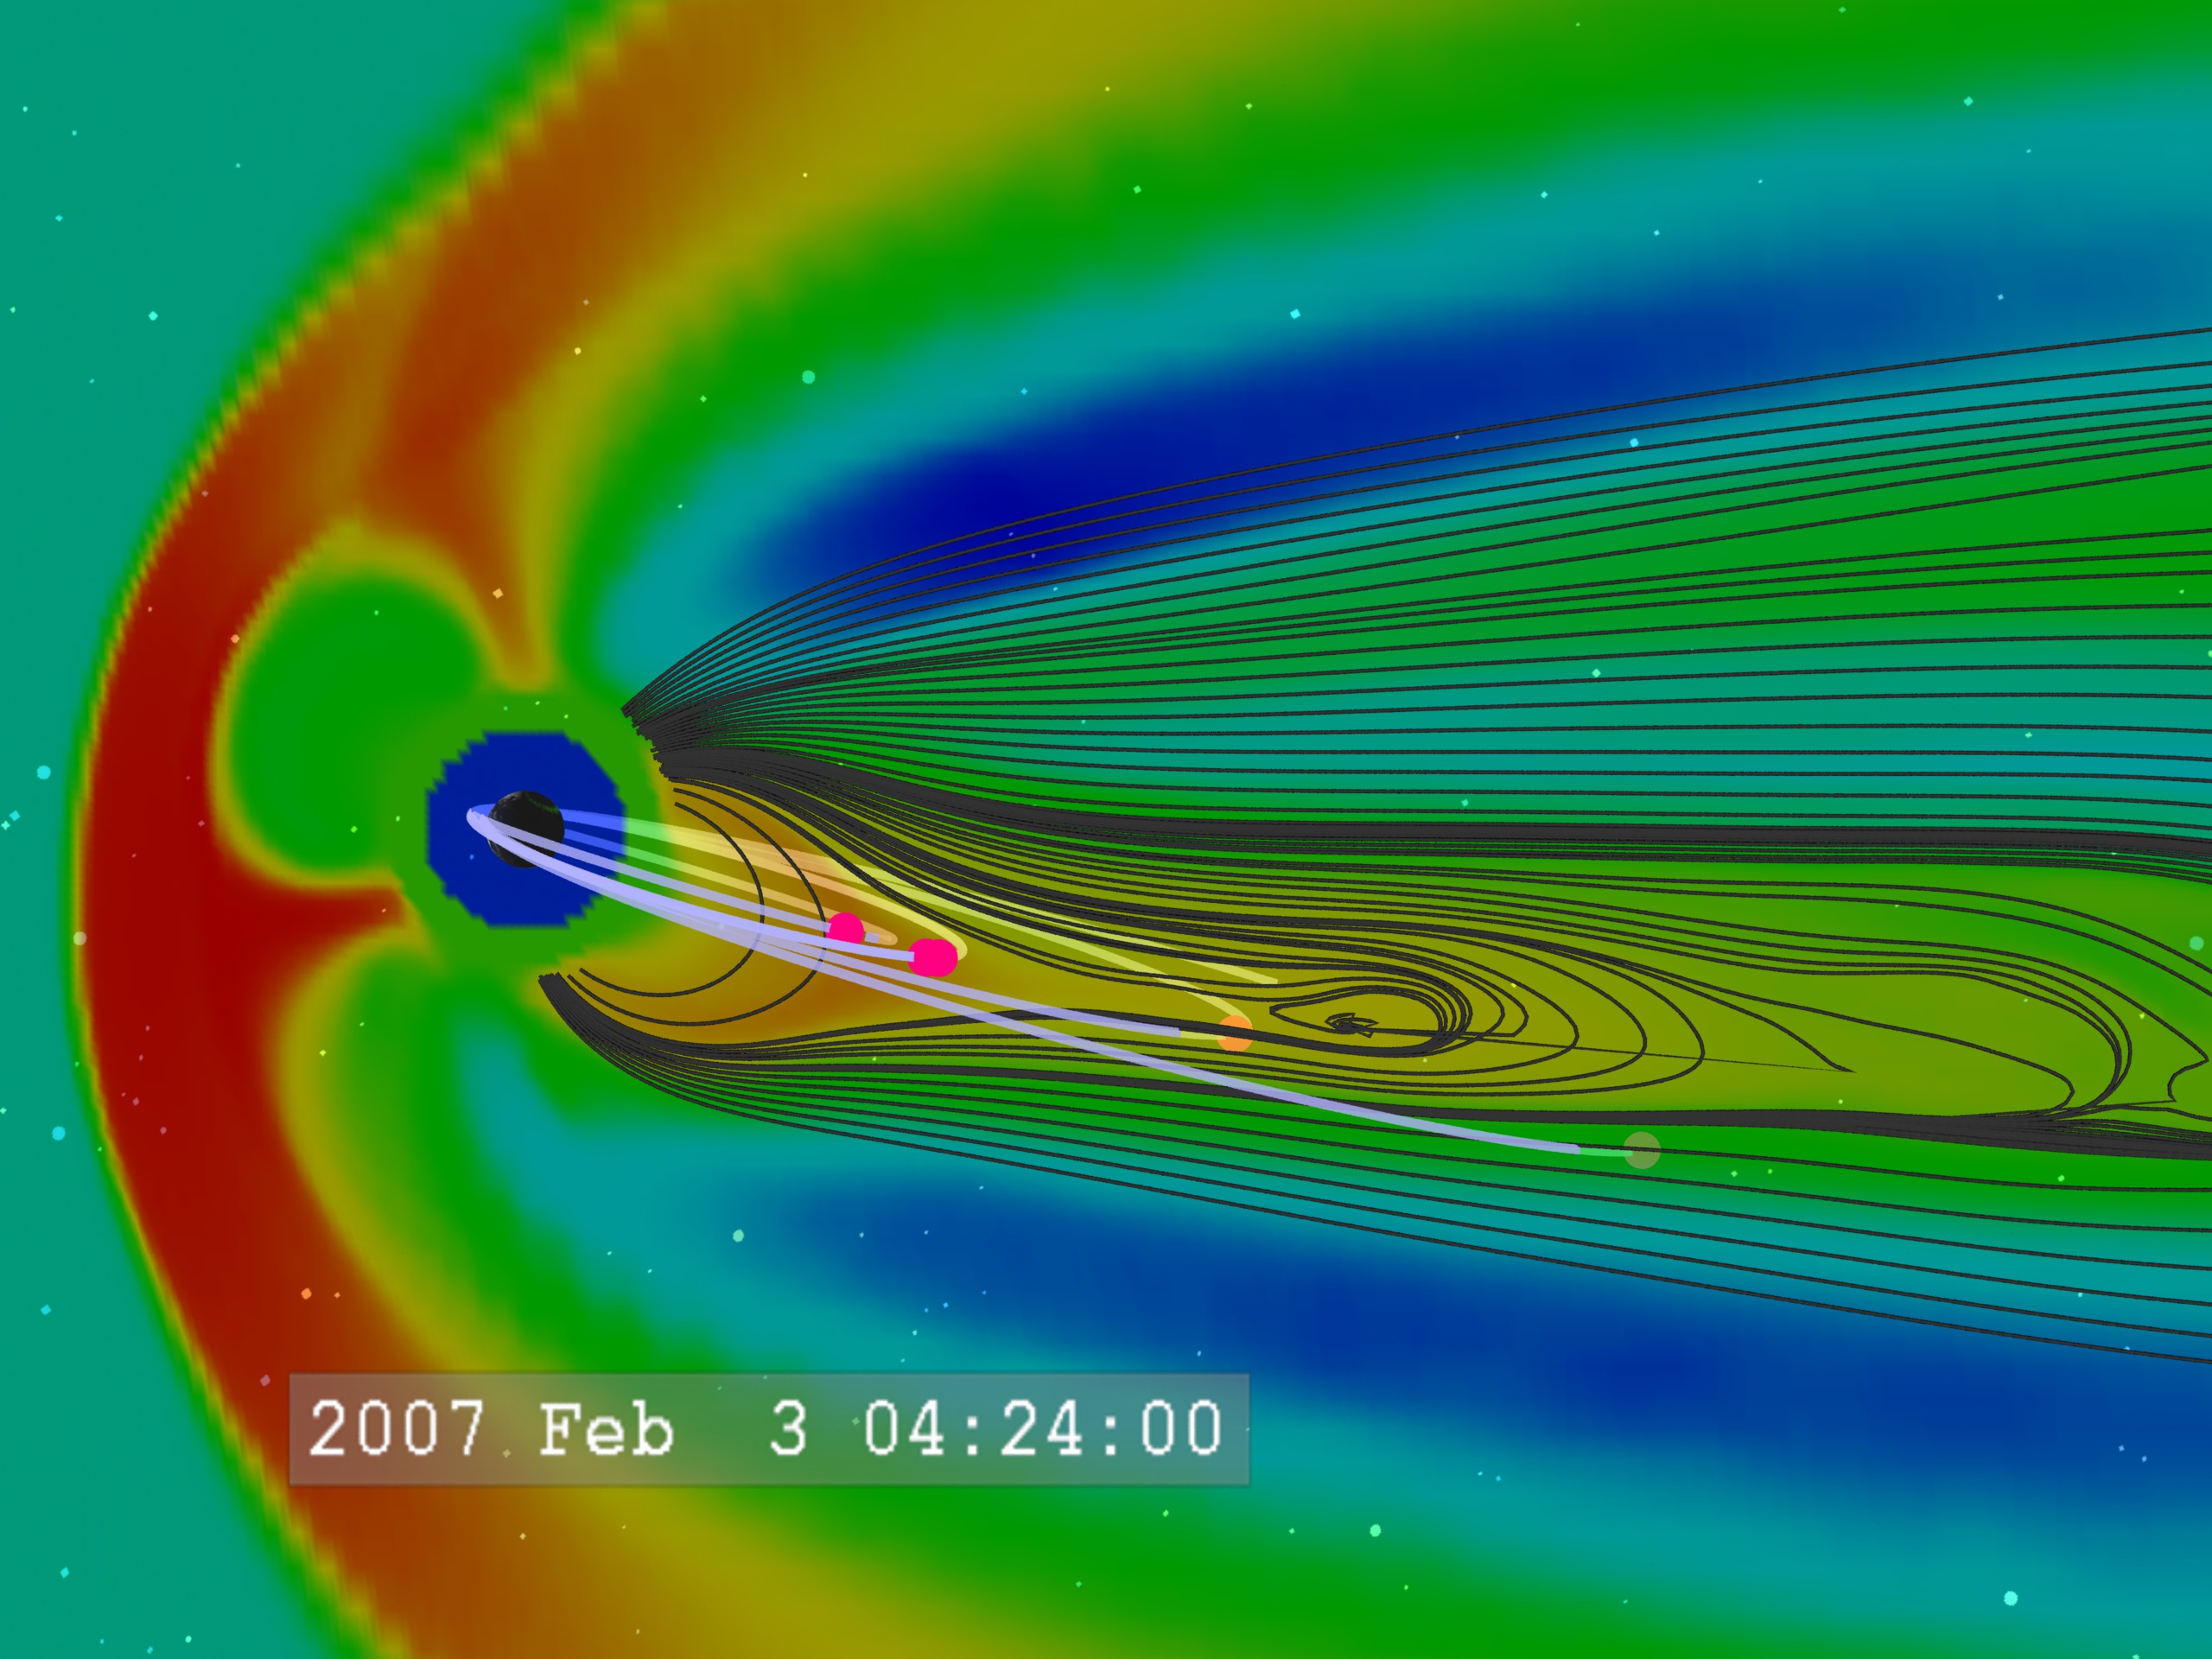 In this view of the plasma pressure (colors) and the magnetic field lines (black), we see a substorm event.